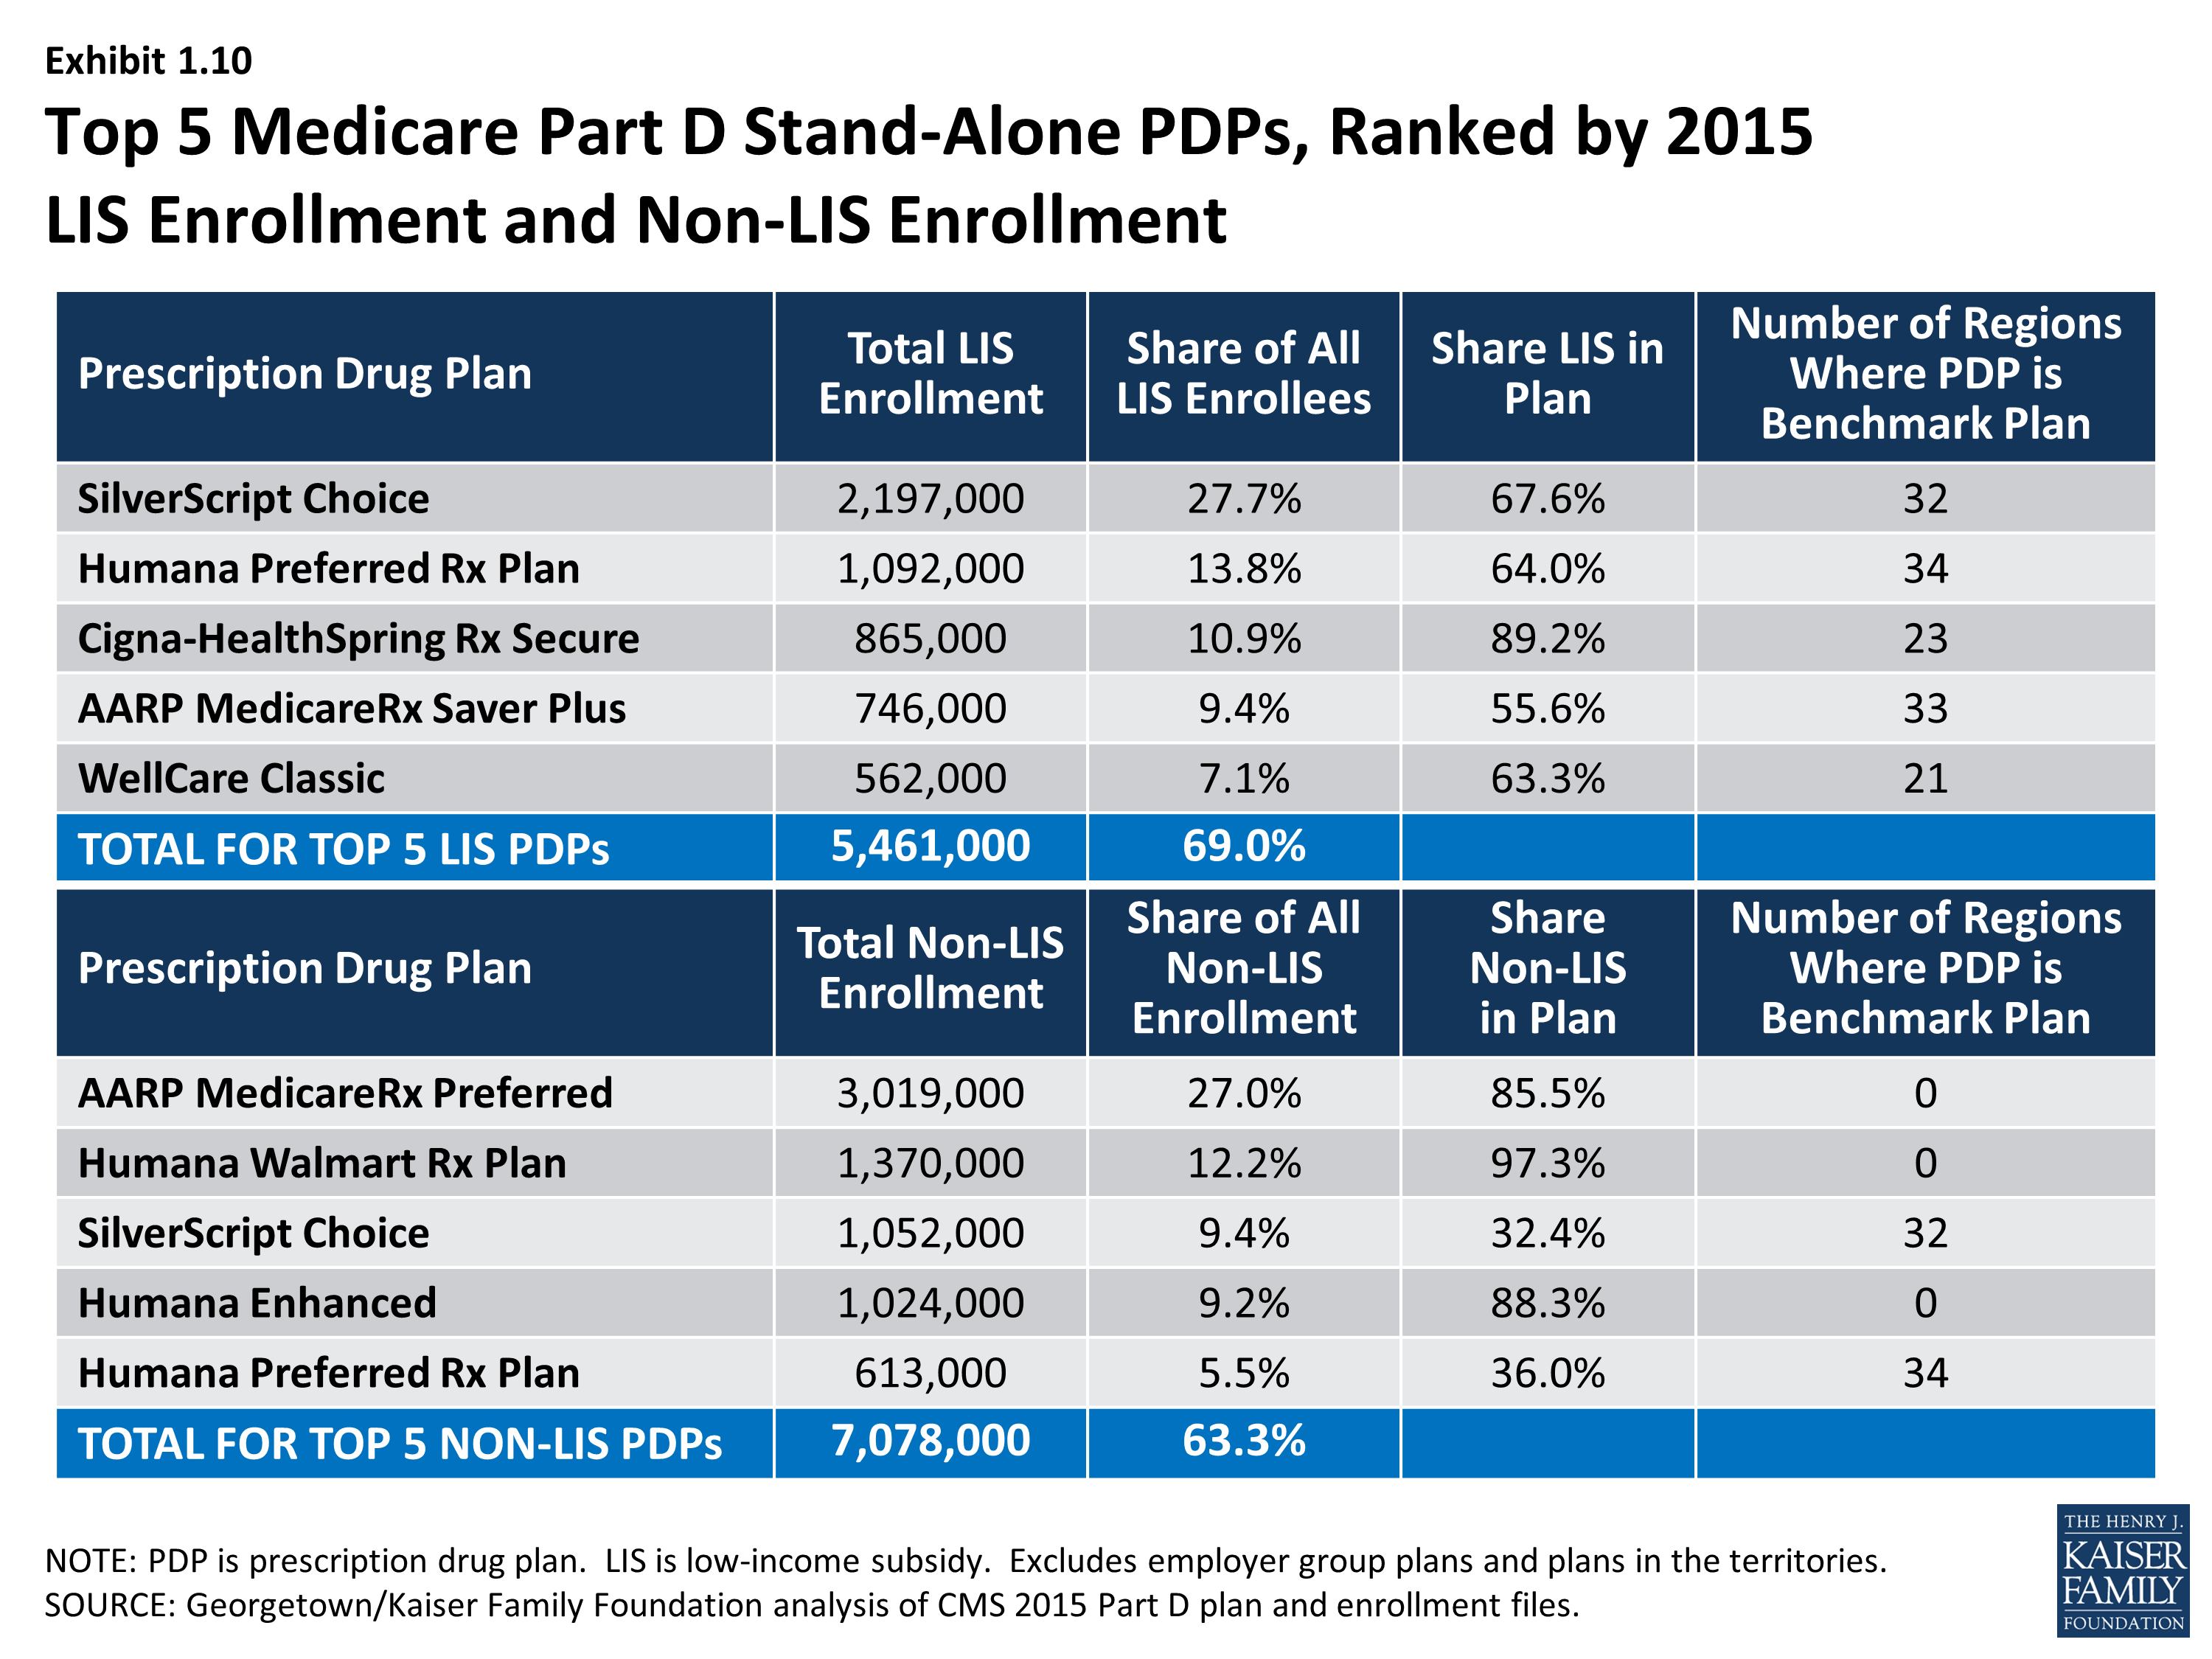 Medicare Part D at Ten Years Section 1 Part D Enrollment and Plan